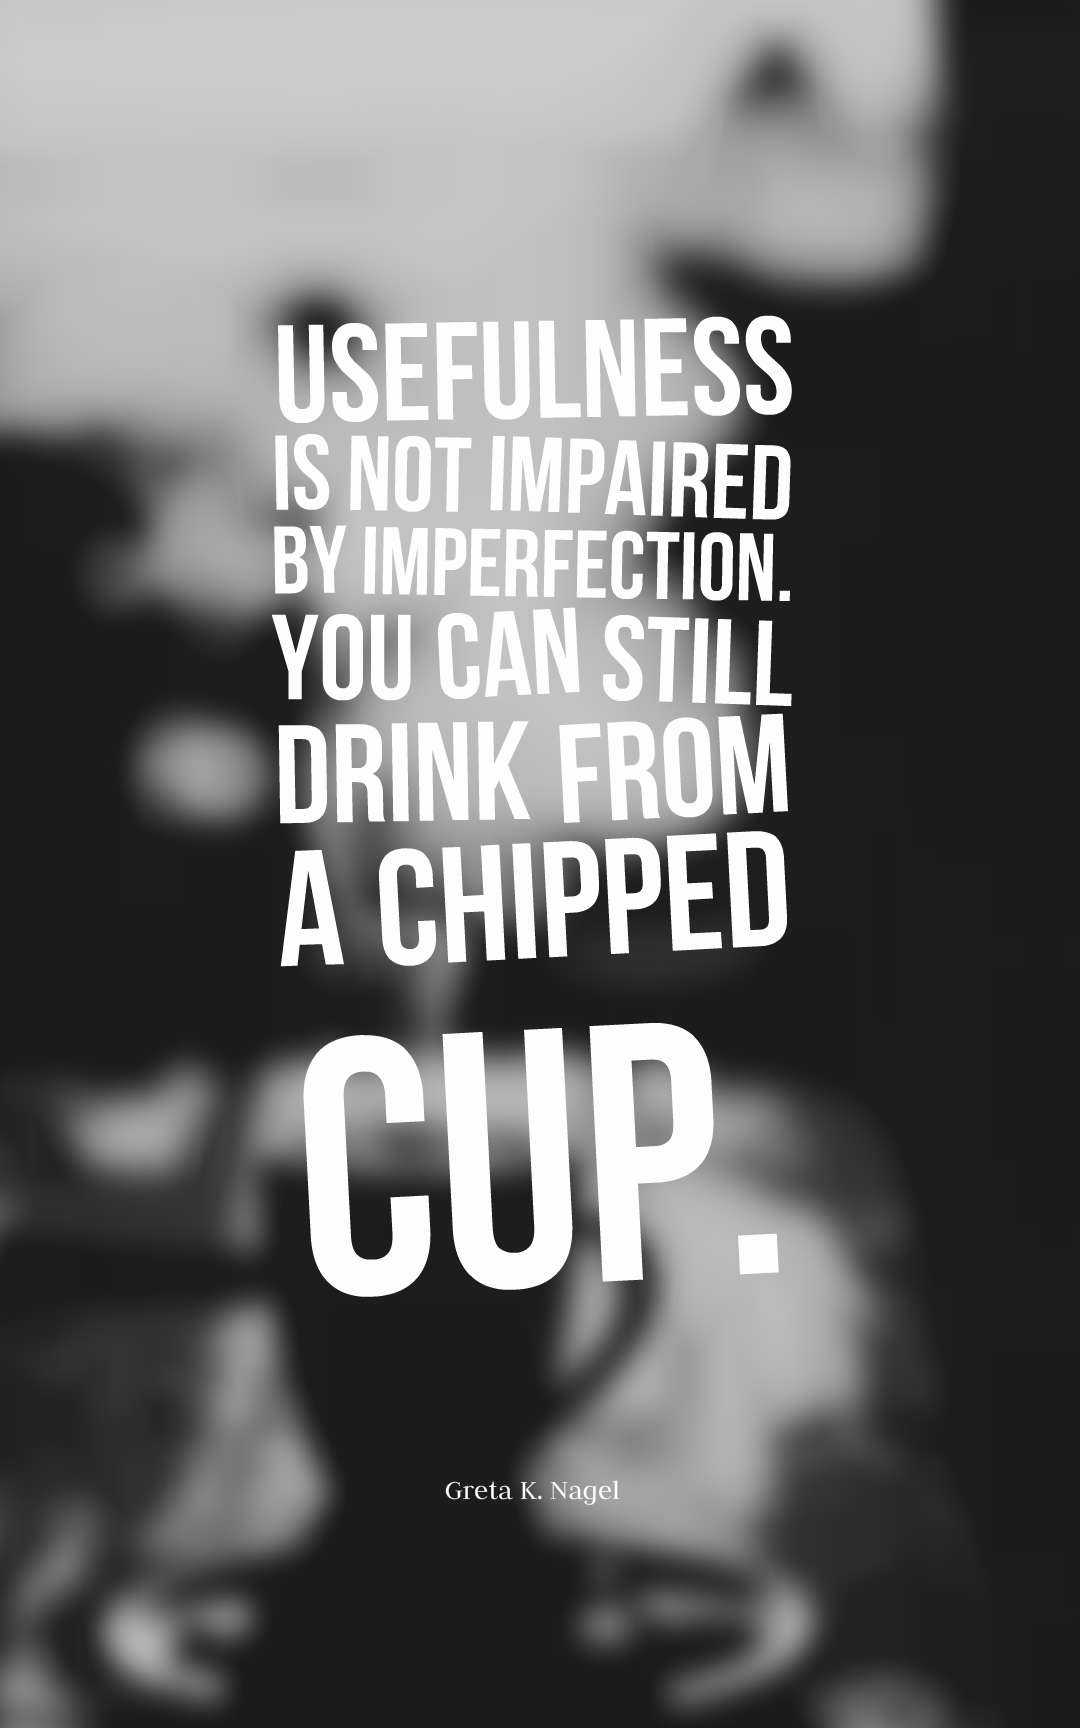 Usefulness is not impaired by imperfection. You can still drink from a chipped cup.